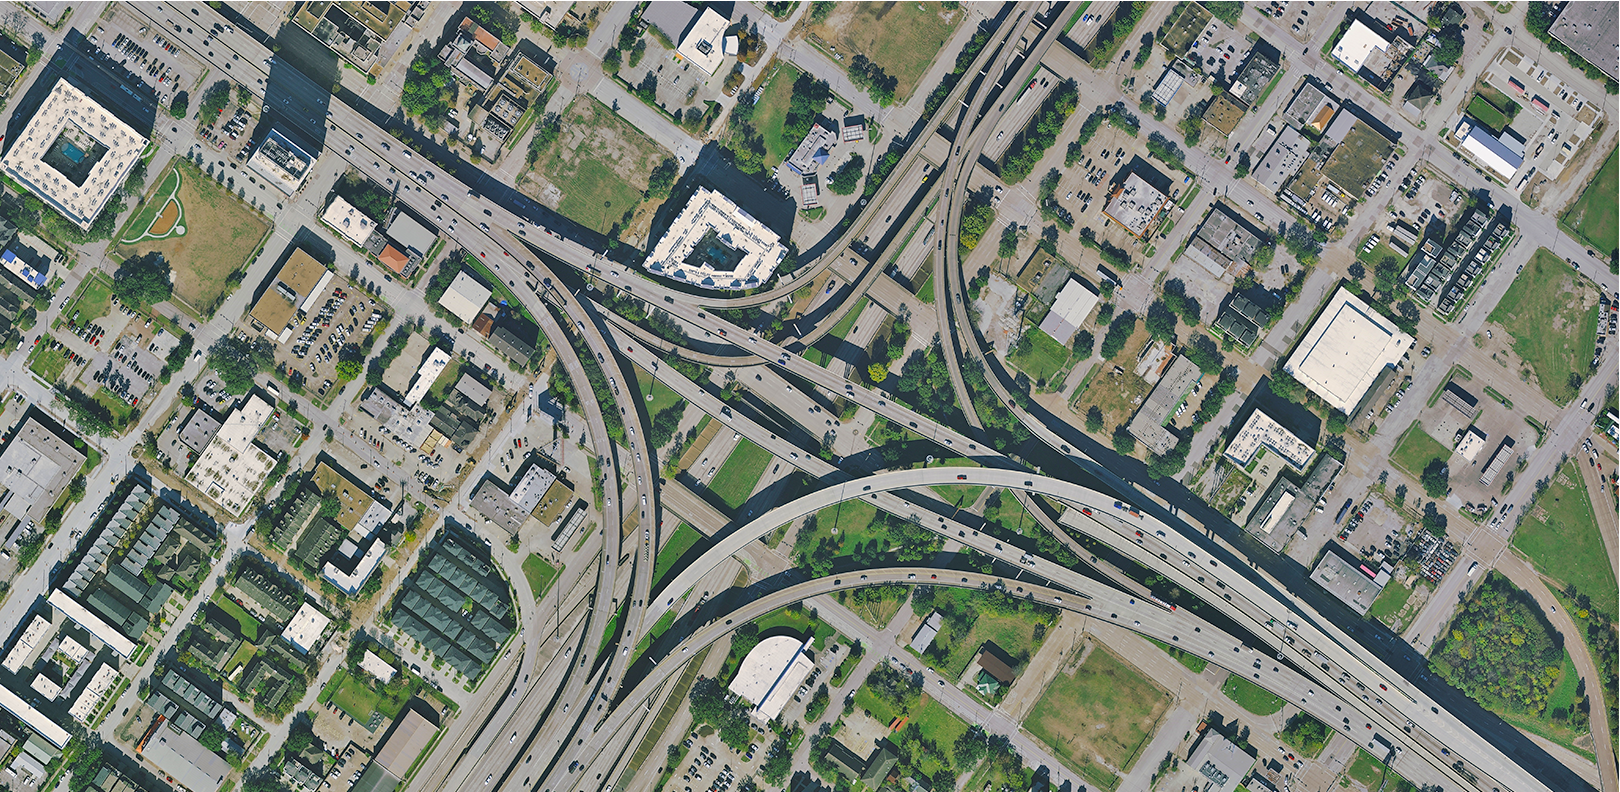 15-centimeter aerial imagery of a freeway junction in Houston, Texas. Source: HxGN Content Program